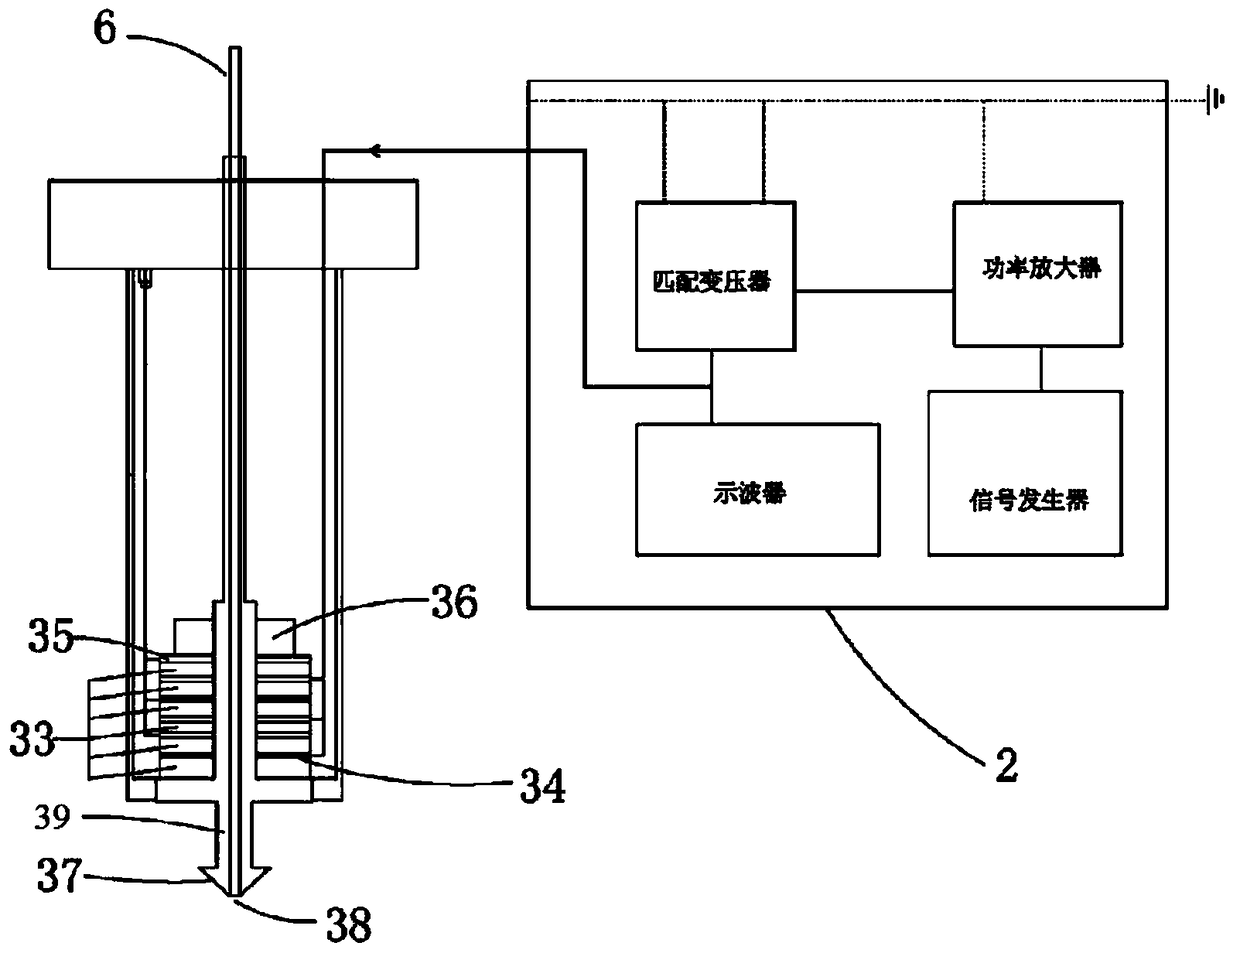 High-frequency ultrasonic atomization particle preparation system with dynamic monitoring